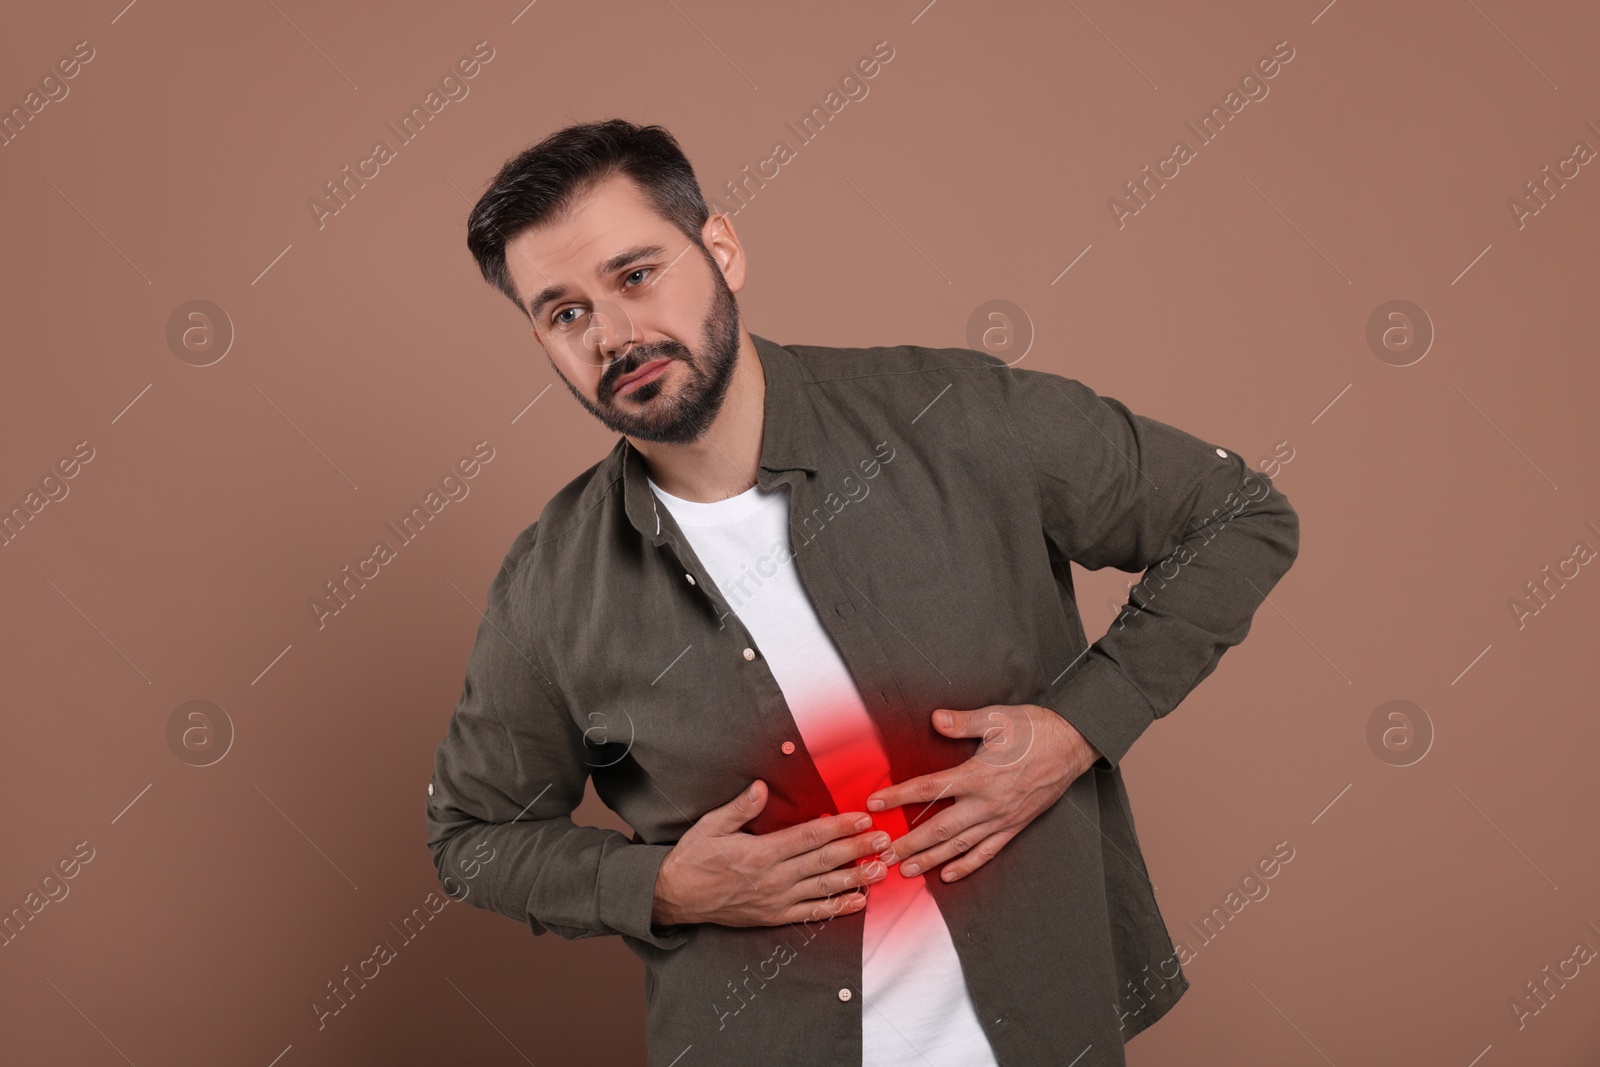 Image of Man suffering from abdominal pain on brown background